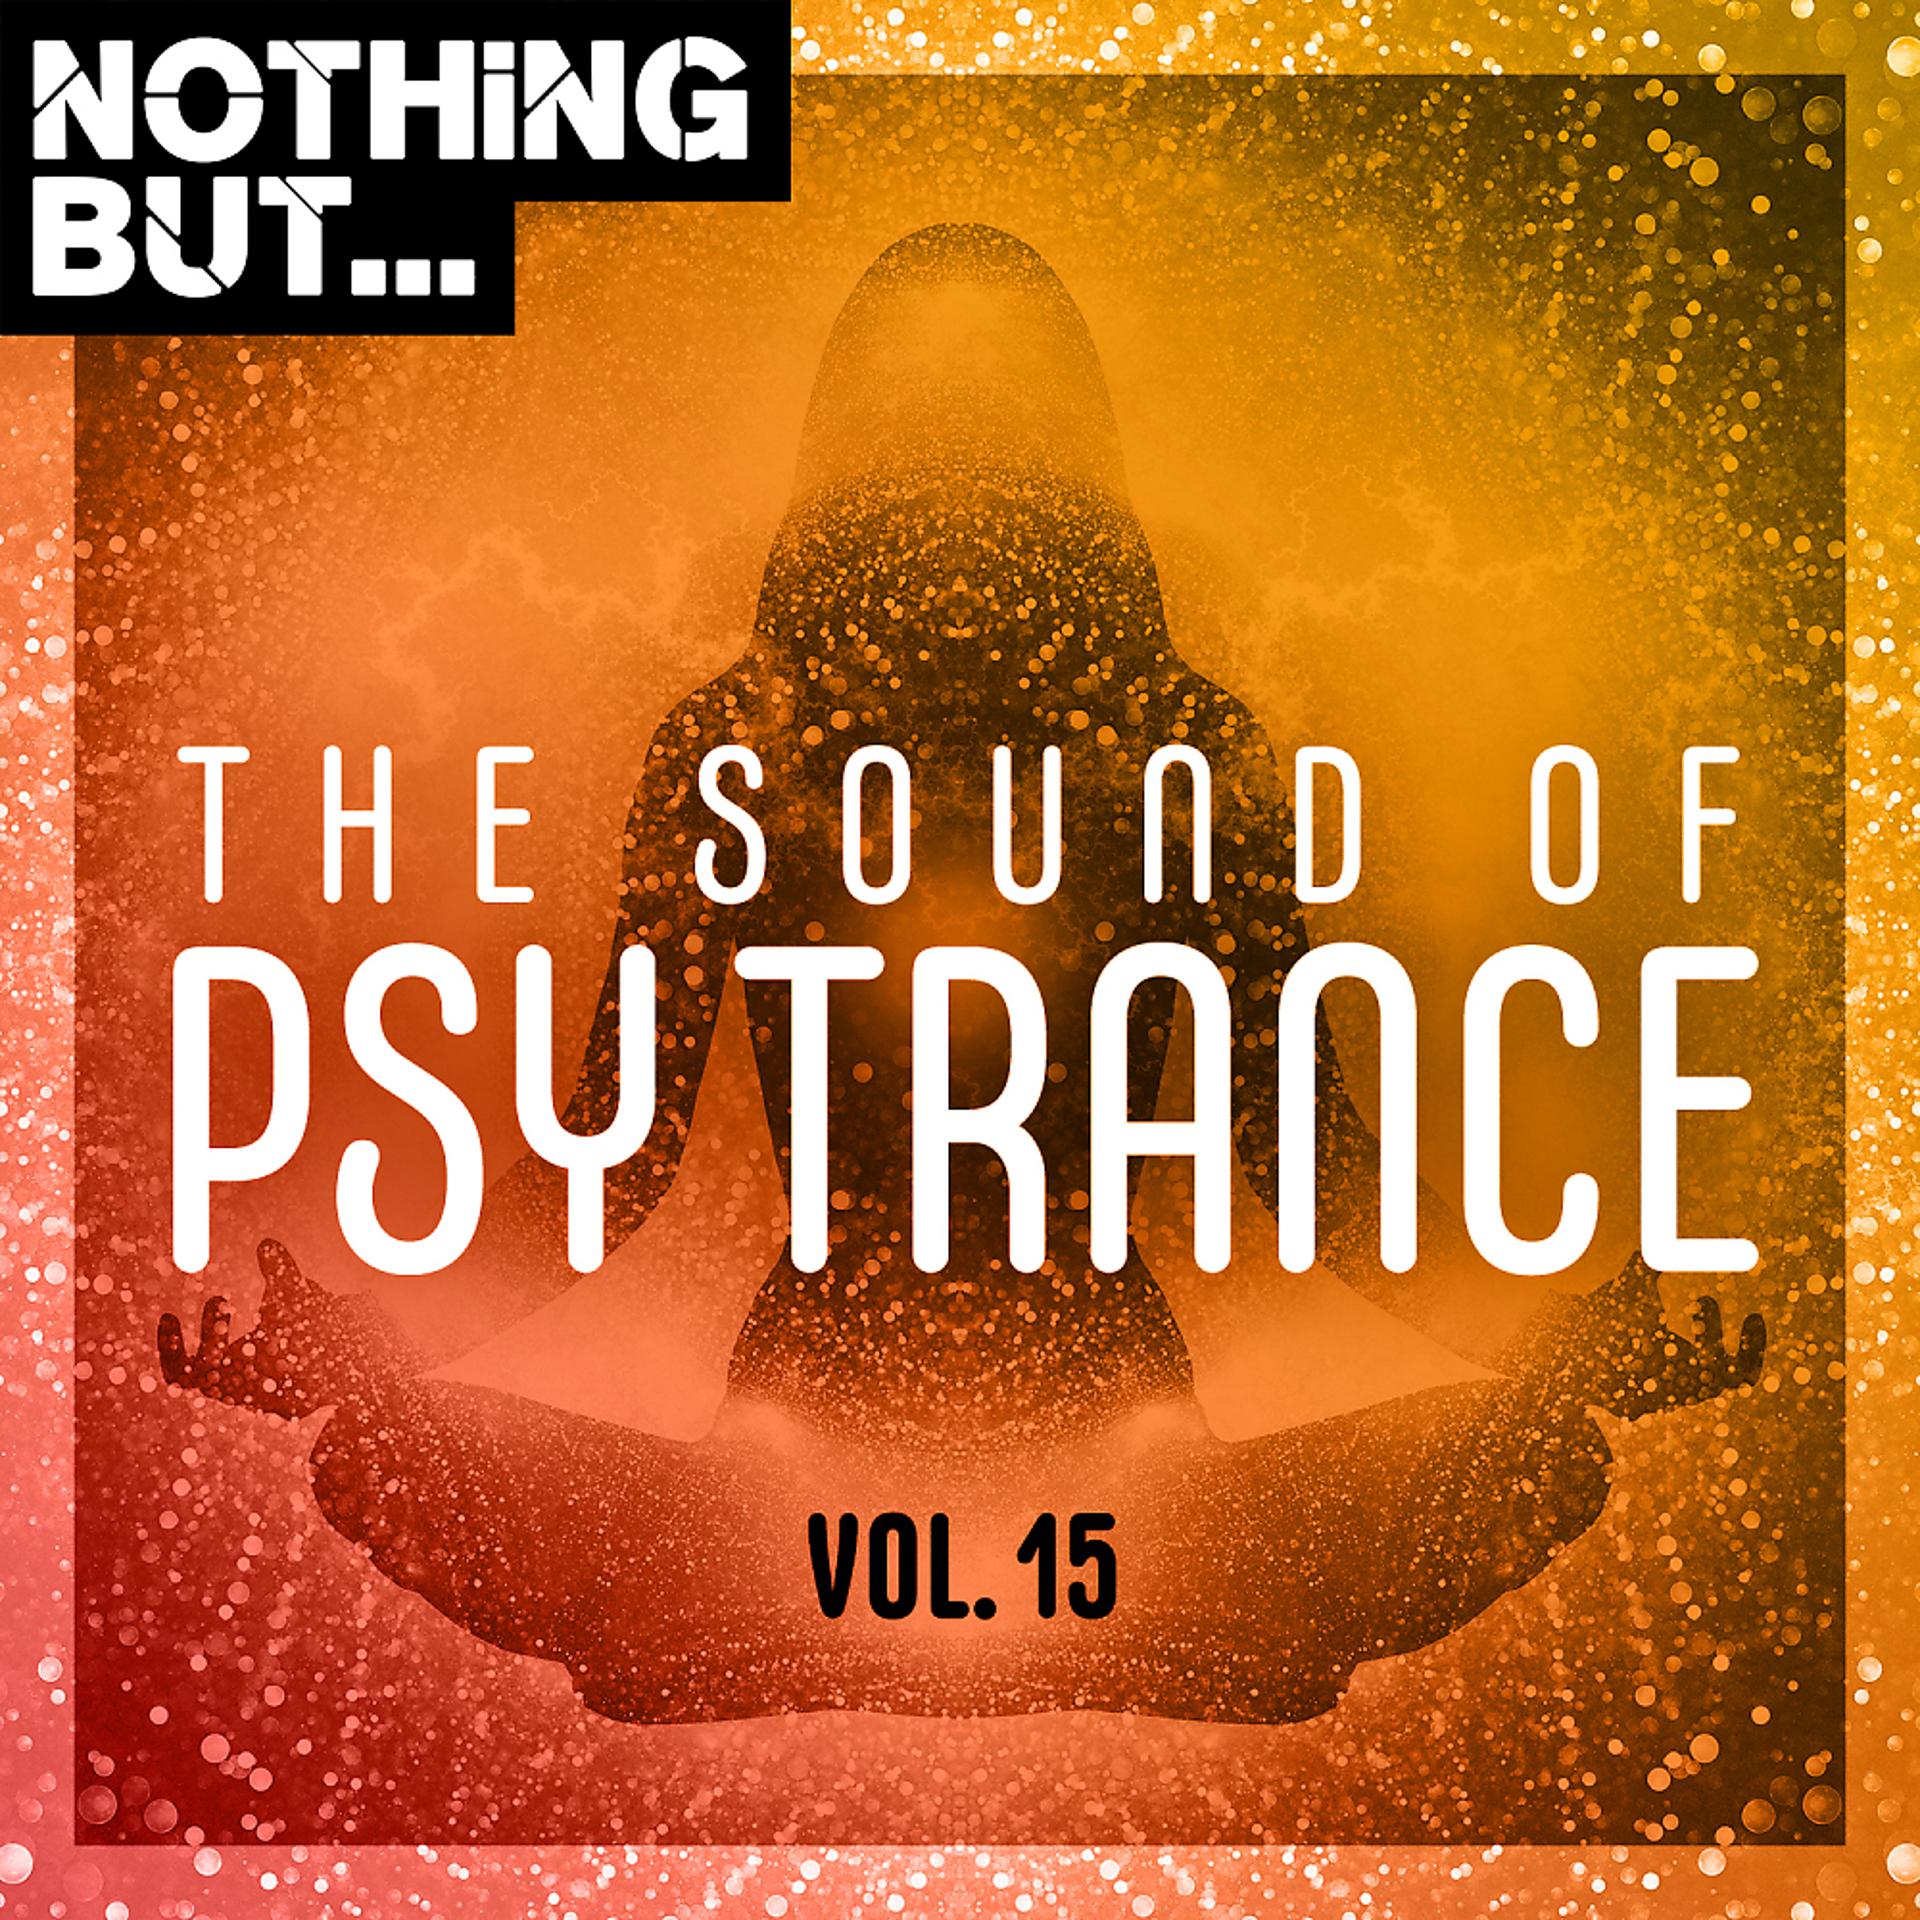 Постер альбома Nothing But... The Sound of Psy Trance, Vol. 15